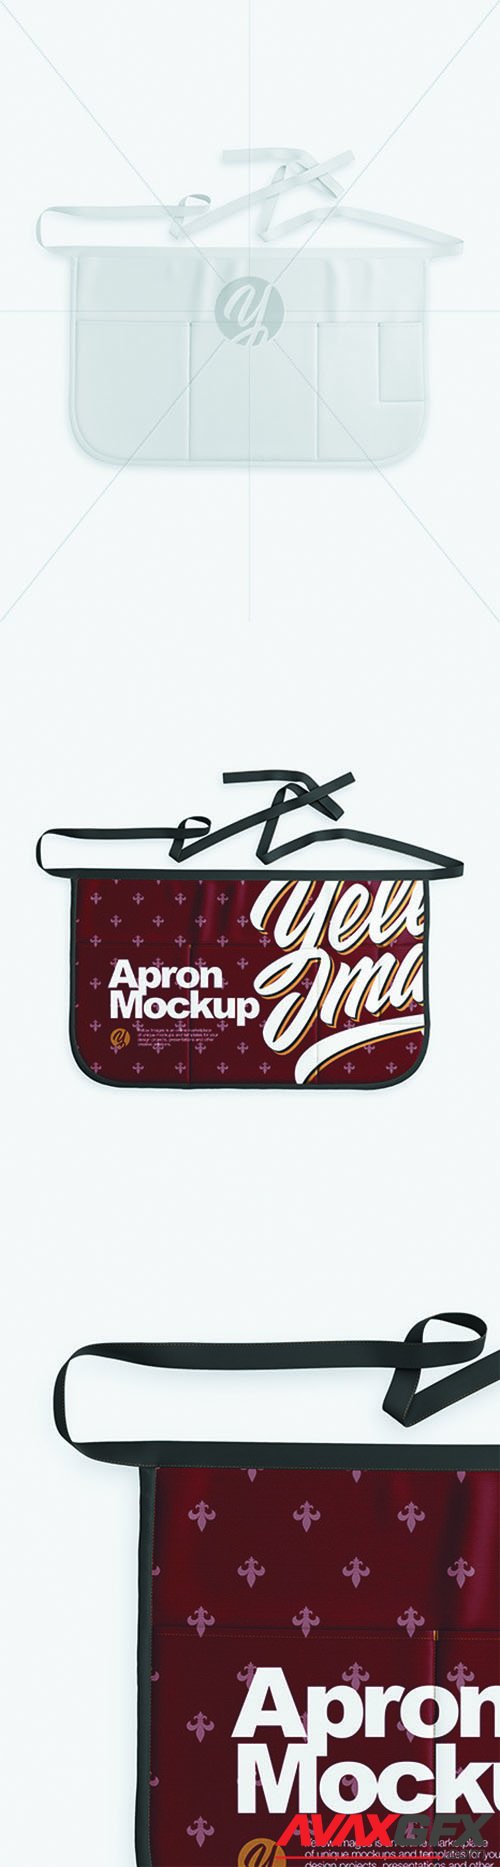 Download Apron Mockup 63831 » AVAXGFX - All Downloads that You Need ...